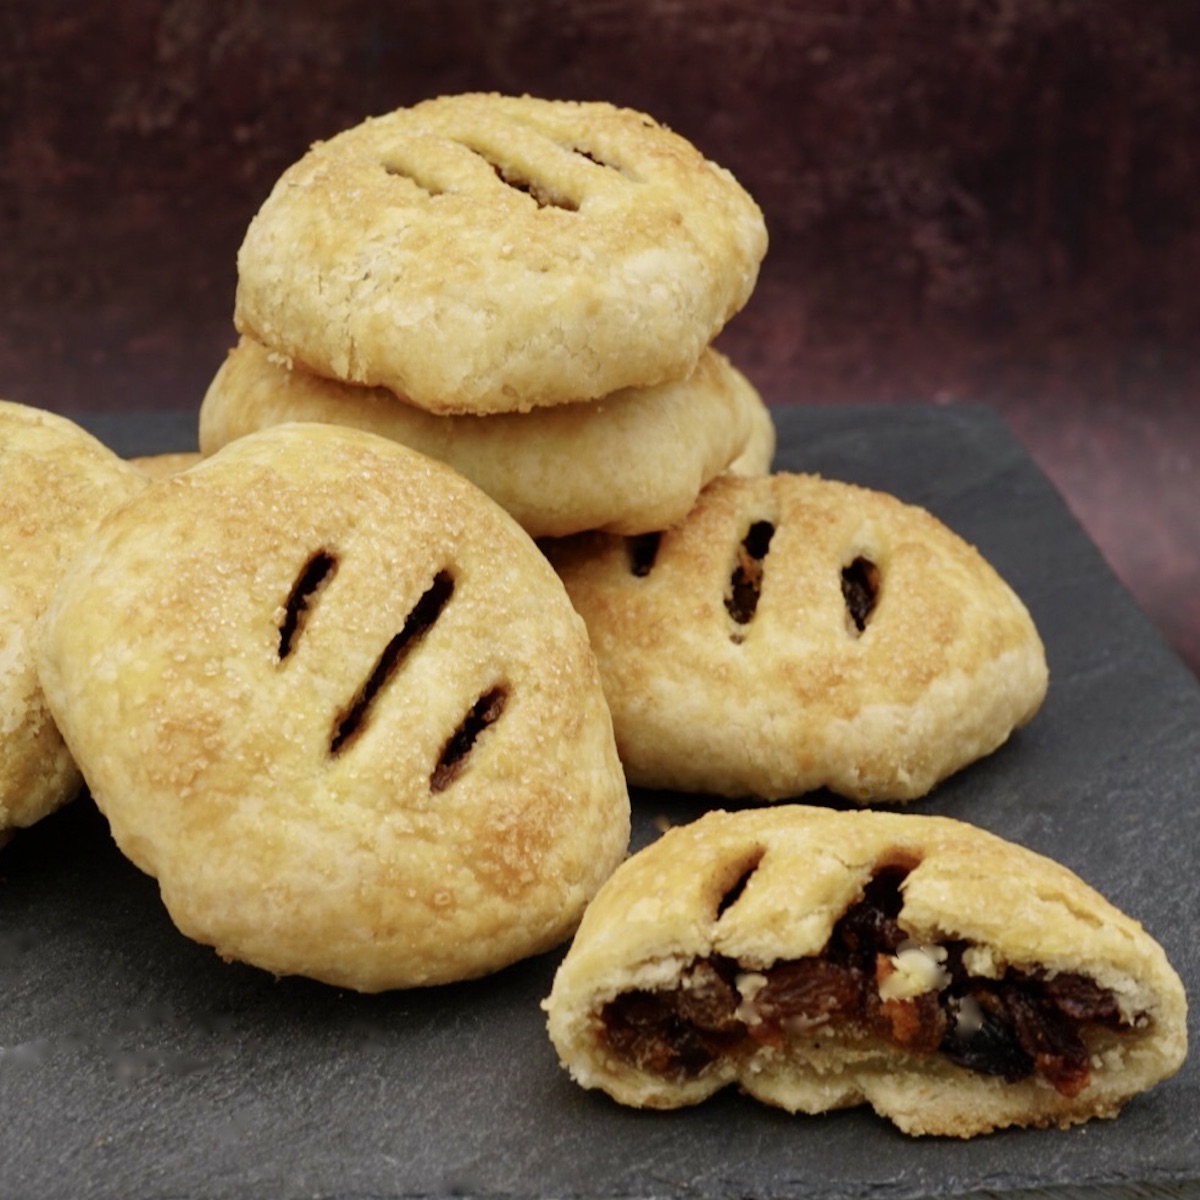 A pile of Eccles cakes including one cut in half.